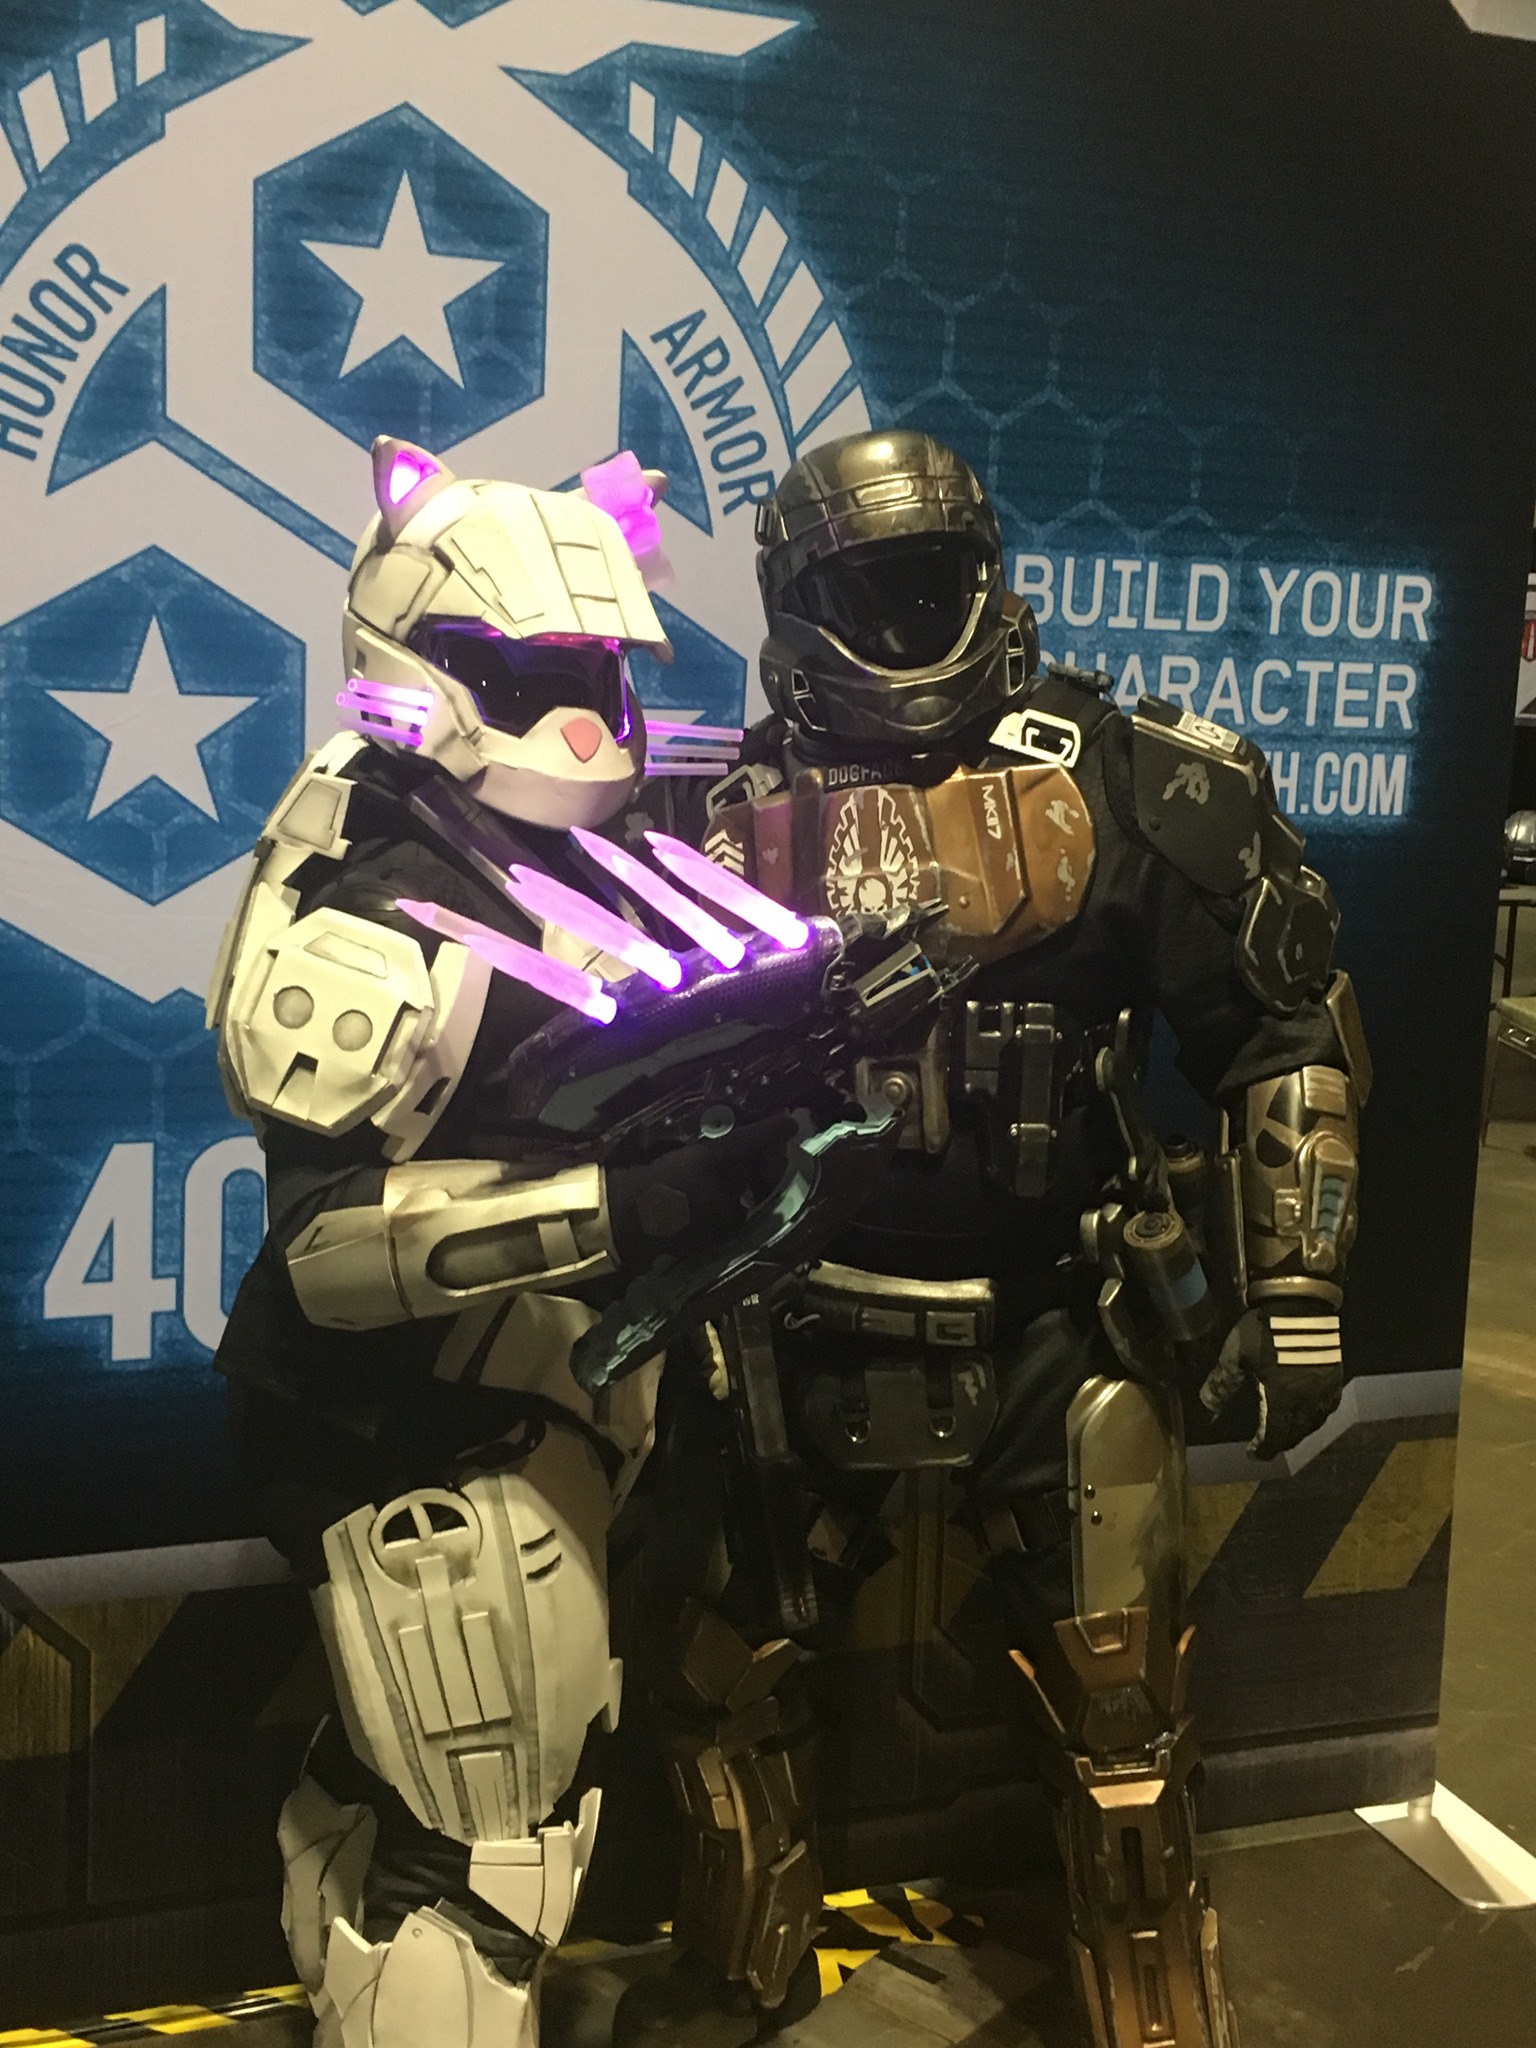 Halo Kitty & ODST | Halo Costume and Prop Maker Community ...